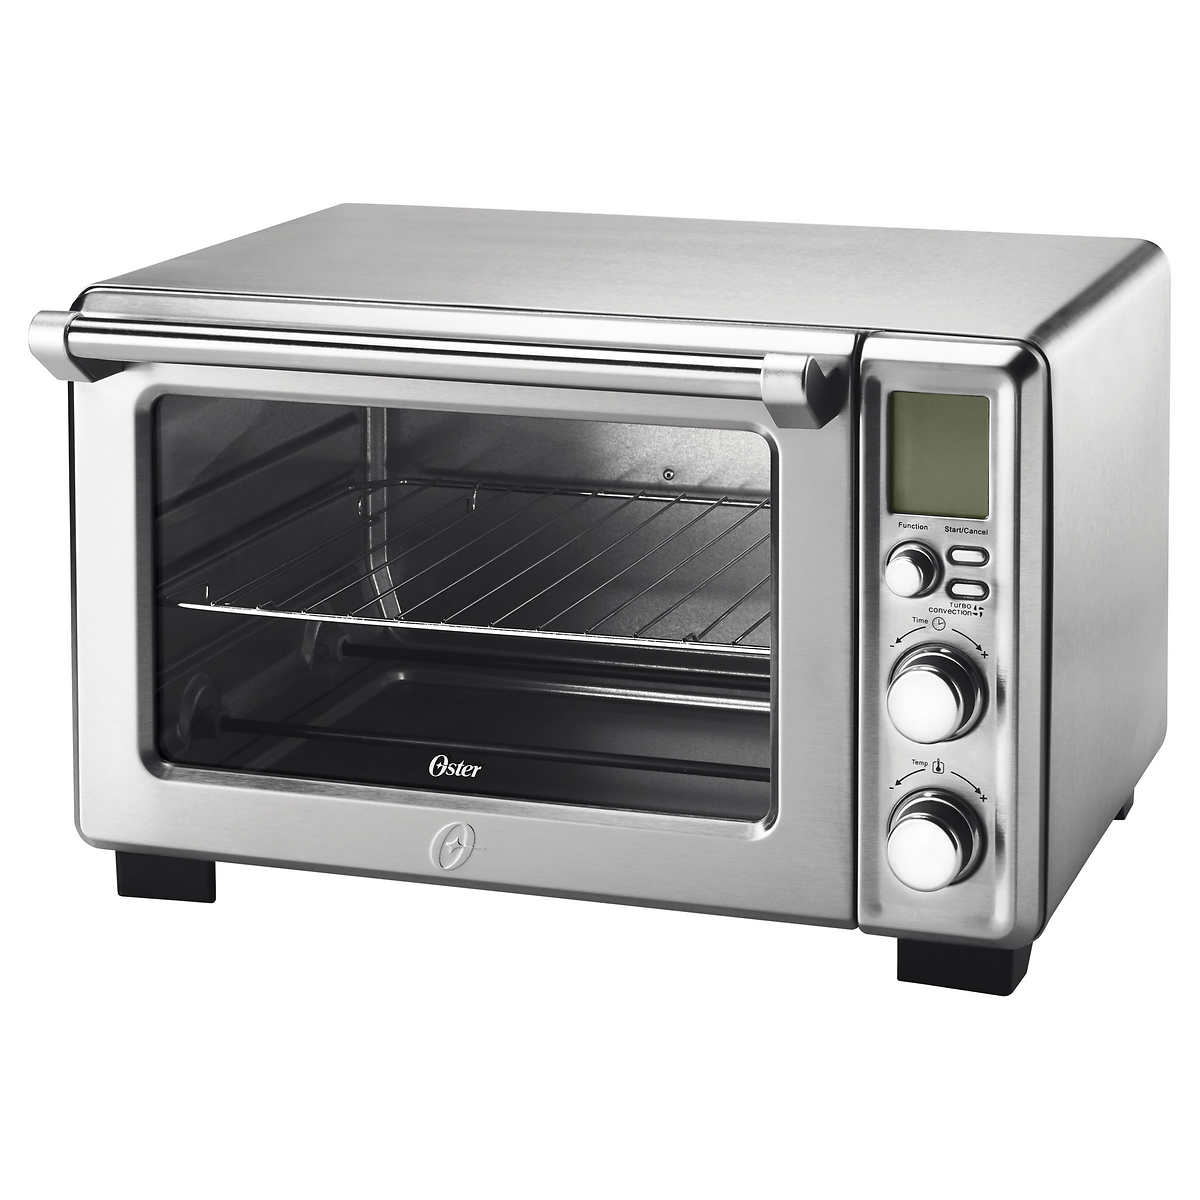 Oster Digital Stainless Steel, Oster Extra Large Digital Countertop Oven Tssttvdgxl